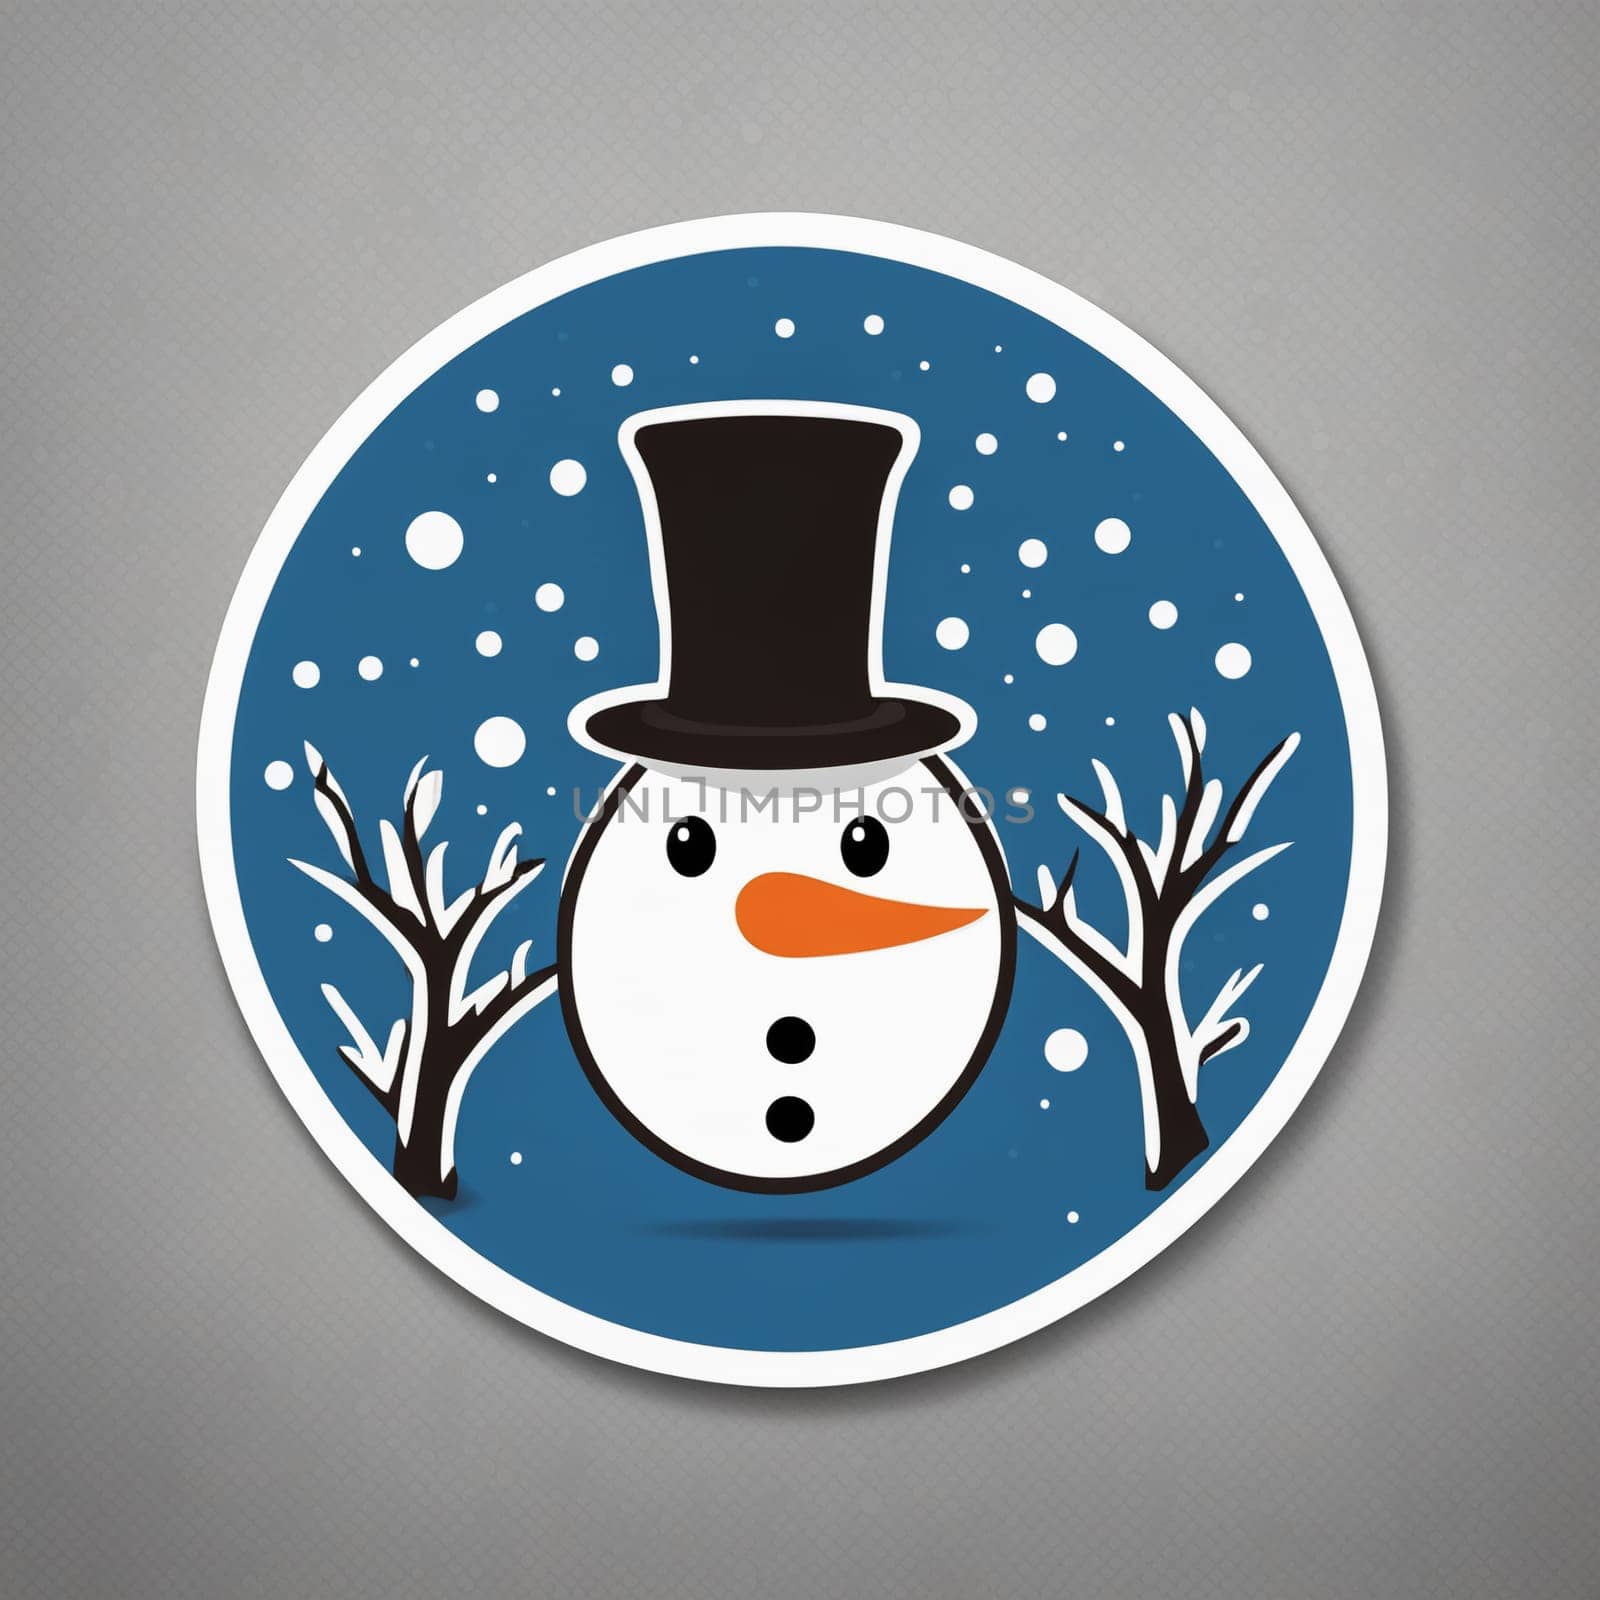 Round logo with snowman, cute character, white and blue colors